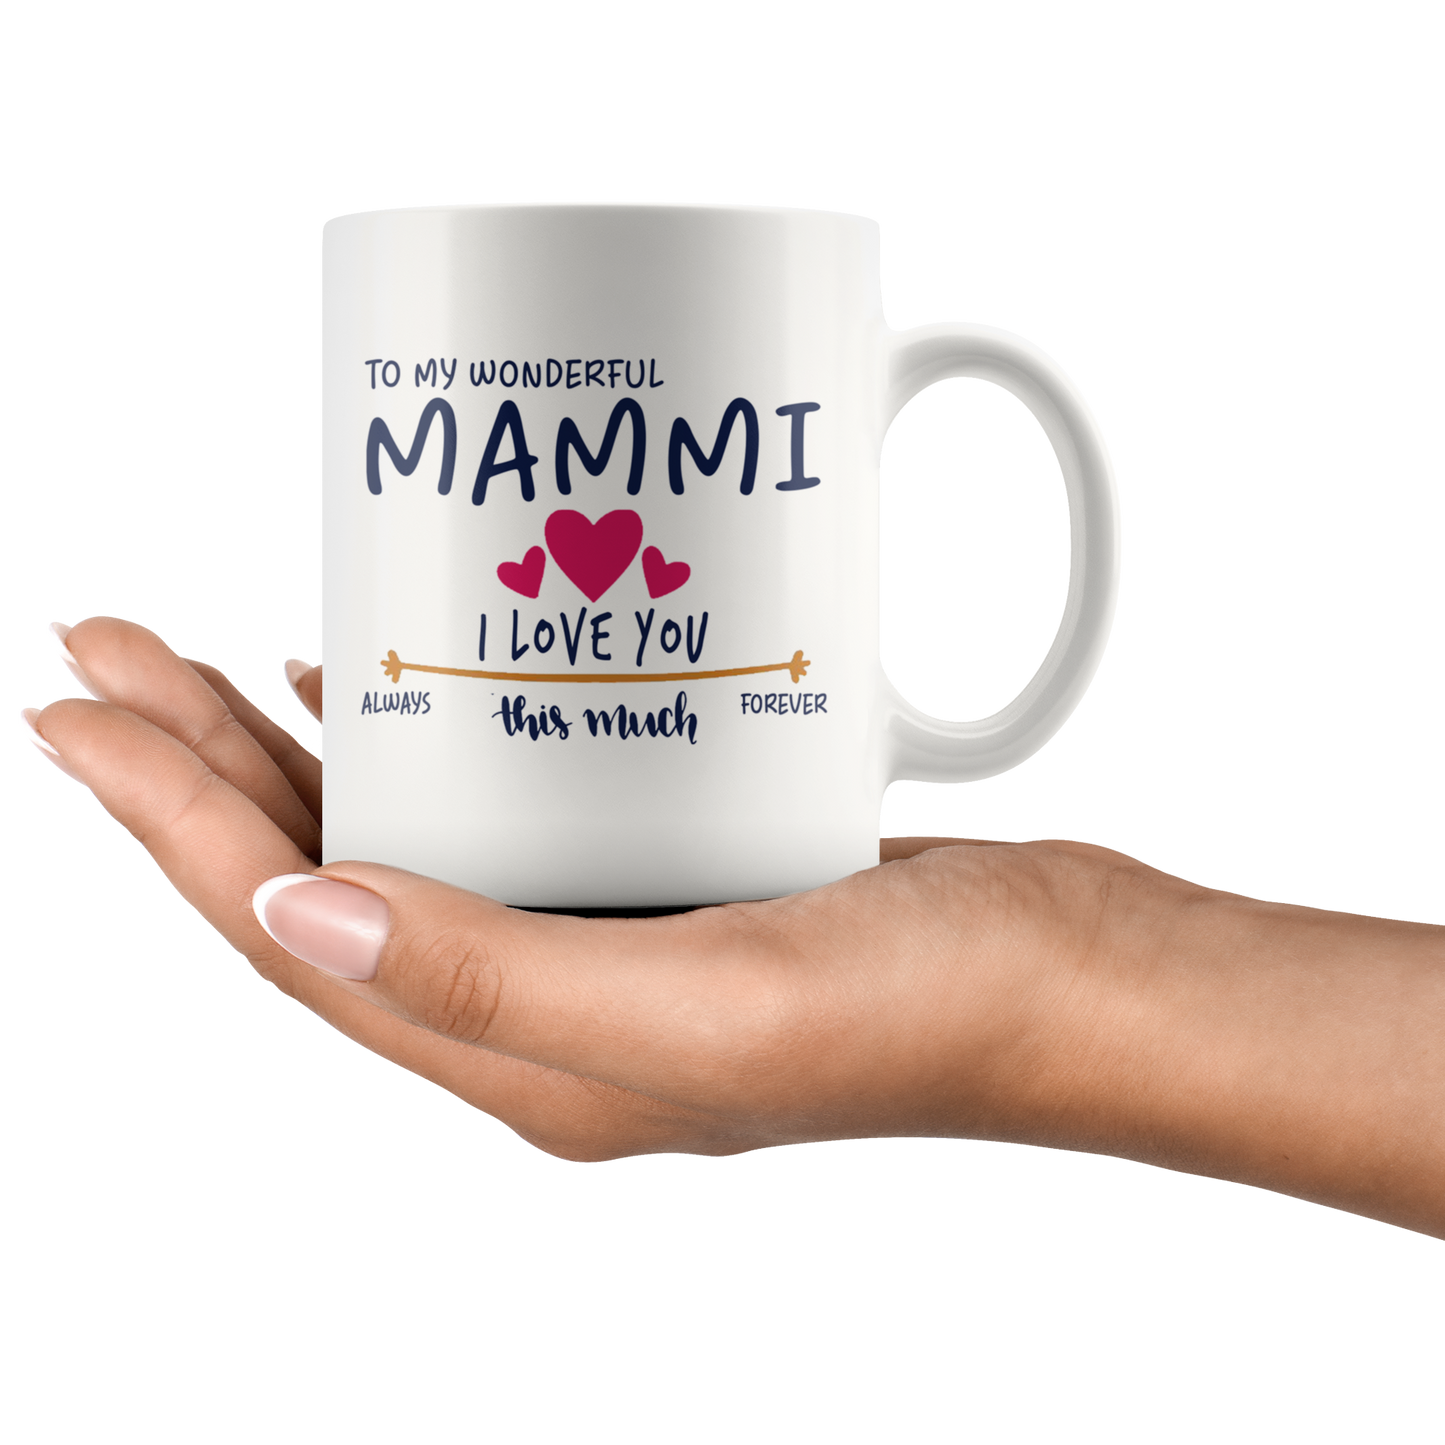 M-20470334-sp-17777 - Valentines Day Mug Gifts For Father, Mother, Grandfather, Gr